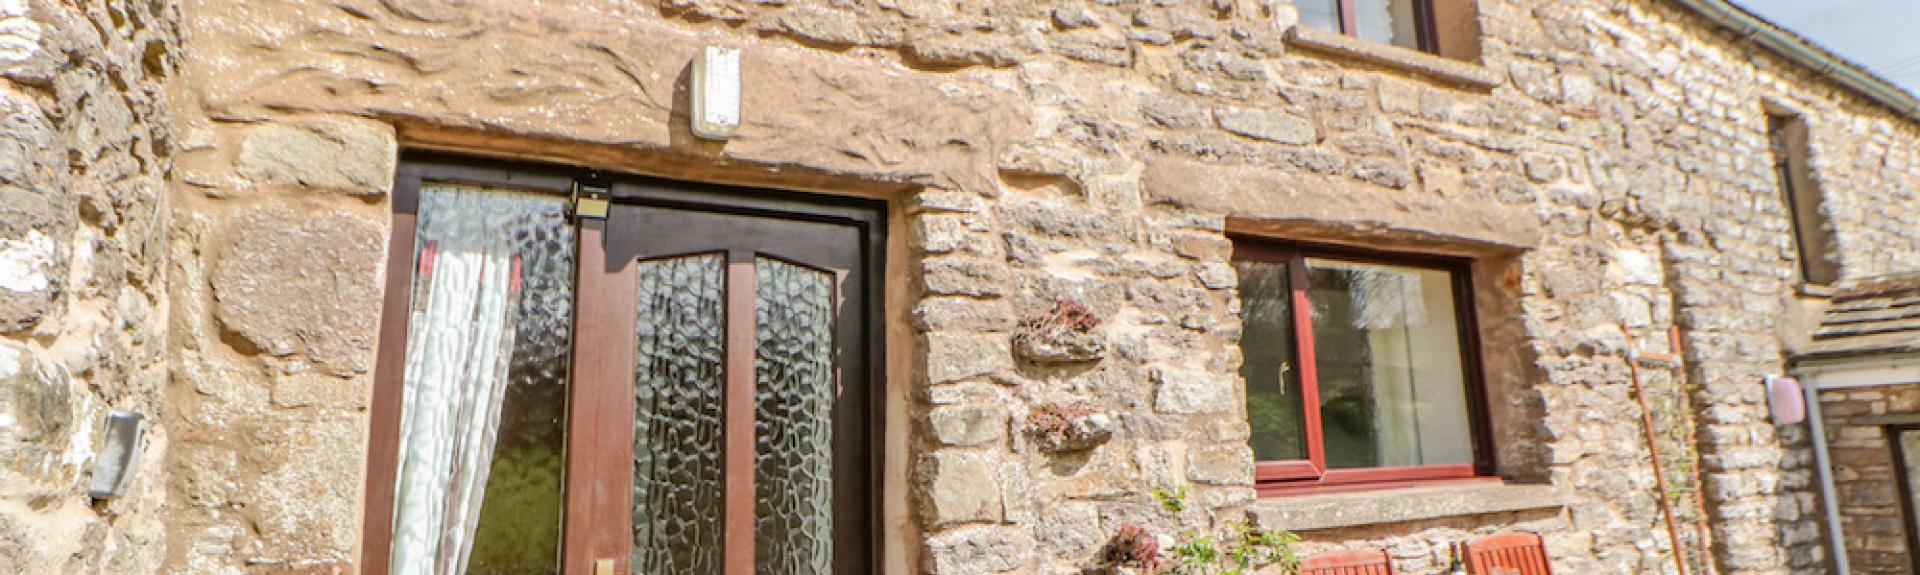 A 2-storey, stone-built holiday cottage in Cumbria overlooking a sunny courtyard